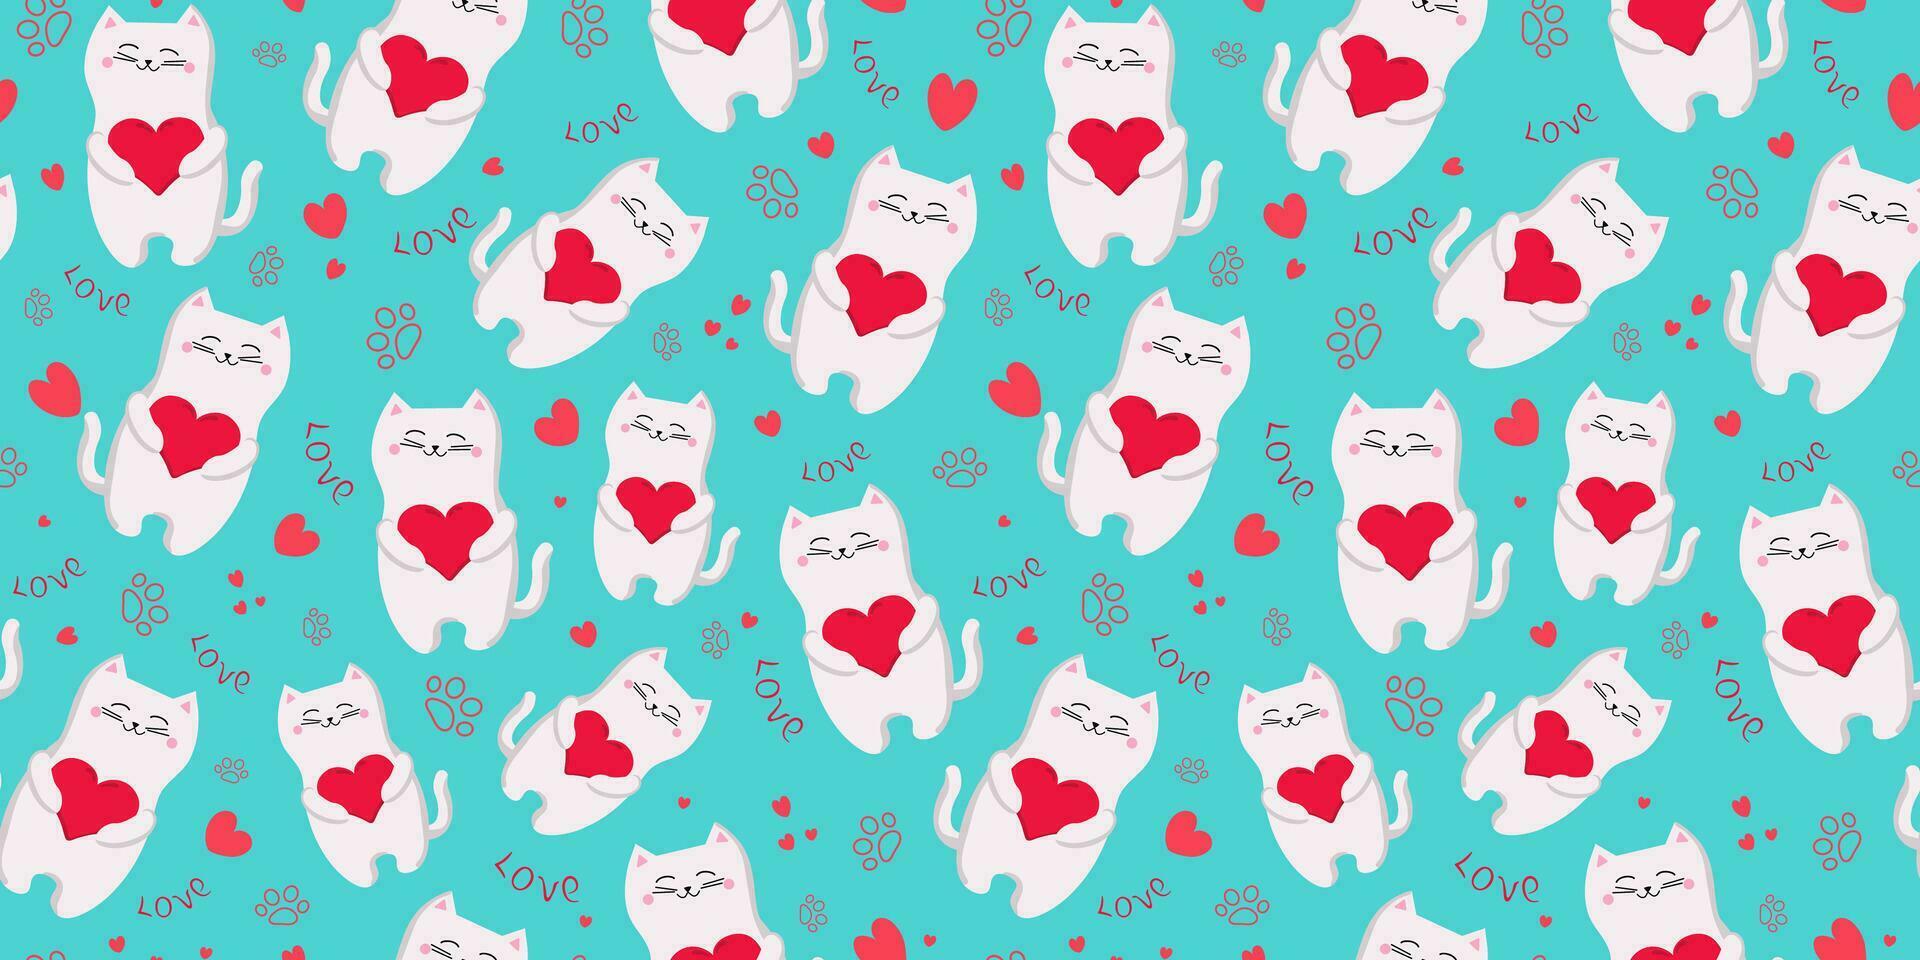 Cartoon kittens pattern. Paw and heart prints. Cute domestic cat holding heart. Festive packaging design for Valentine's Day. Seamless vector background, wallpaper.